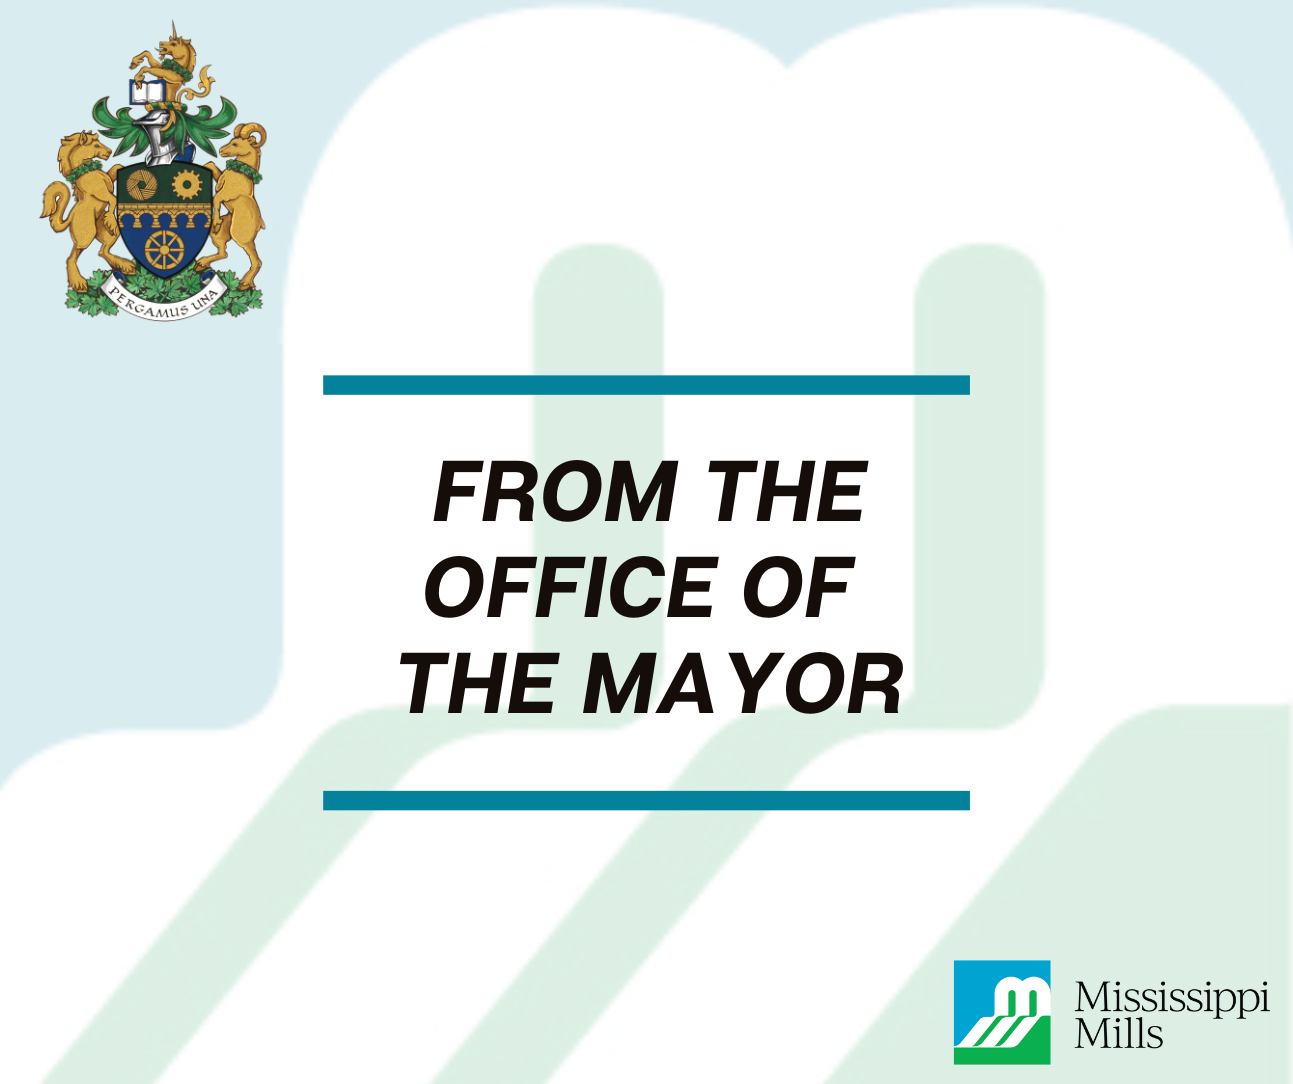 Blue and green graphic with coat of arms and Mississippi Mills logo with text 'From the Office of the Mayor'